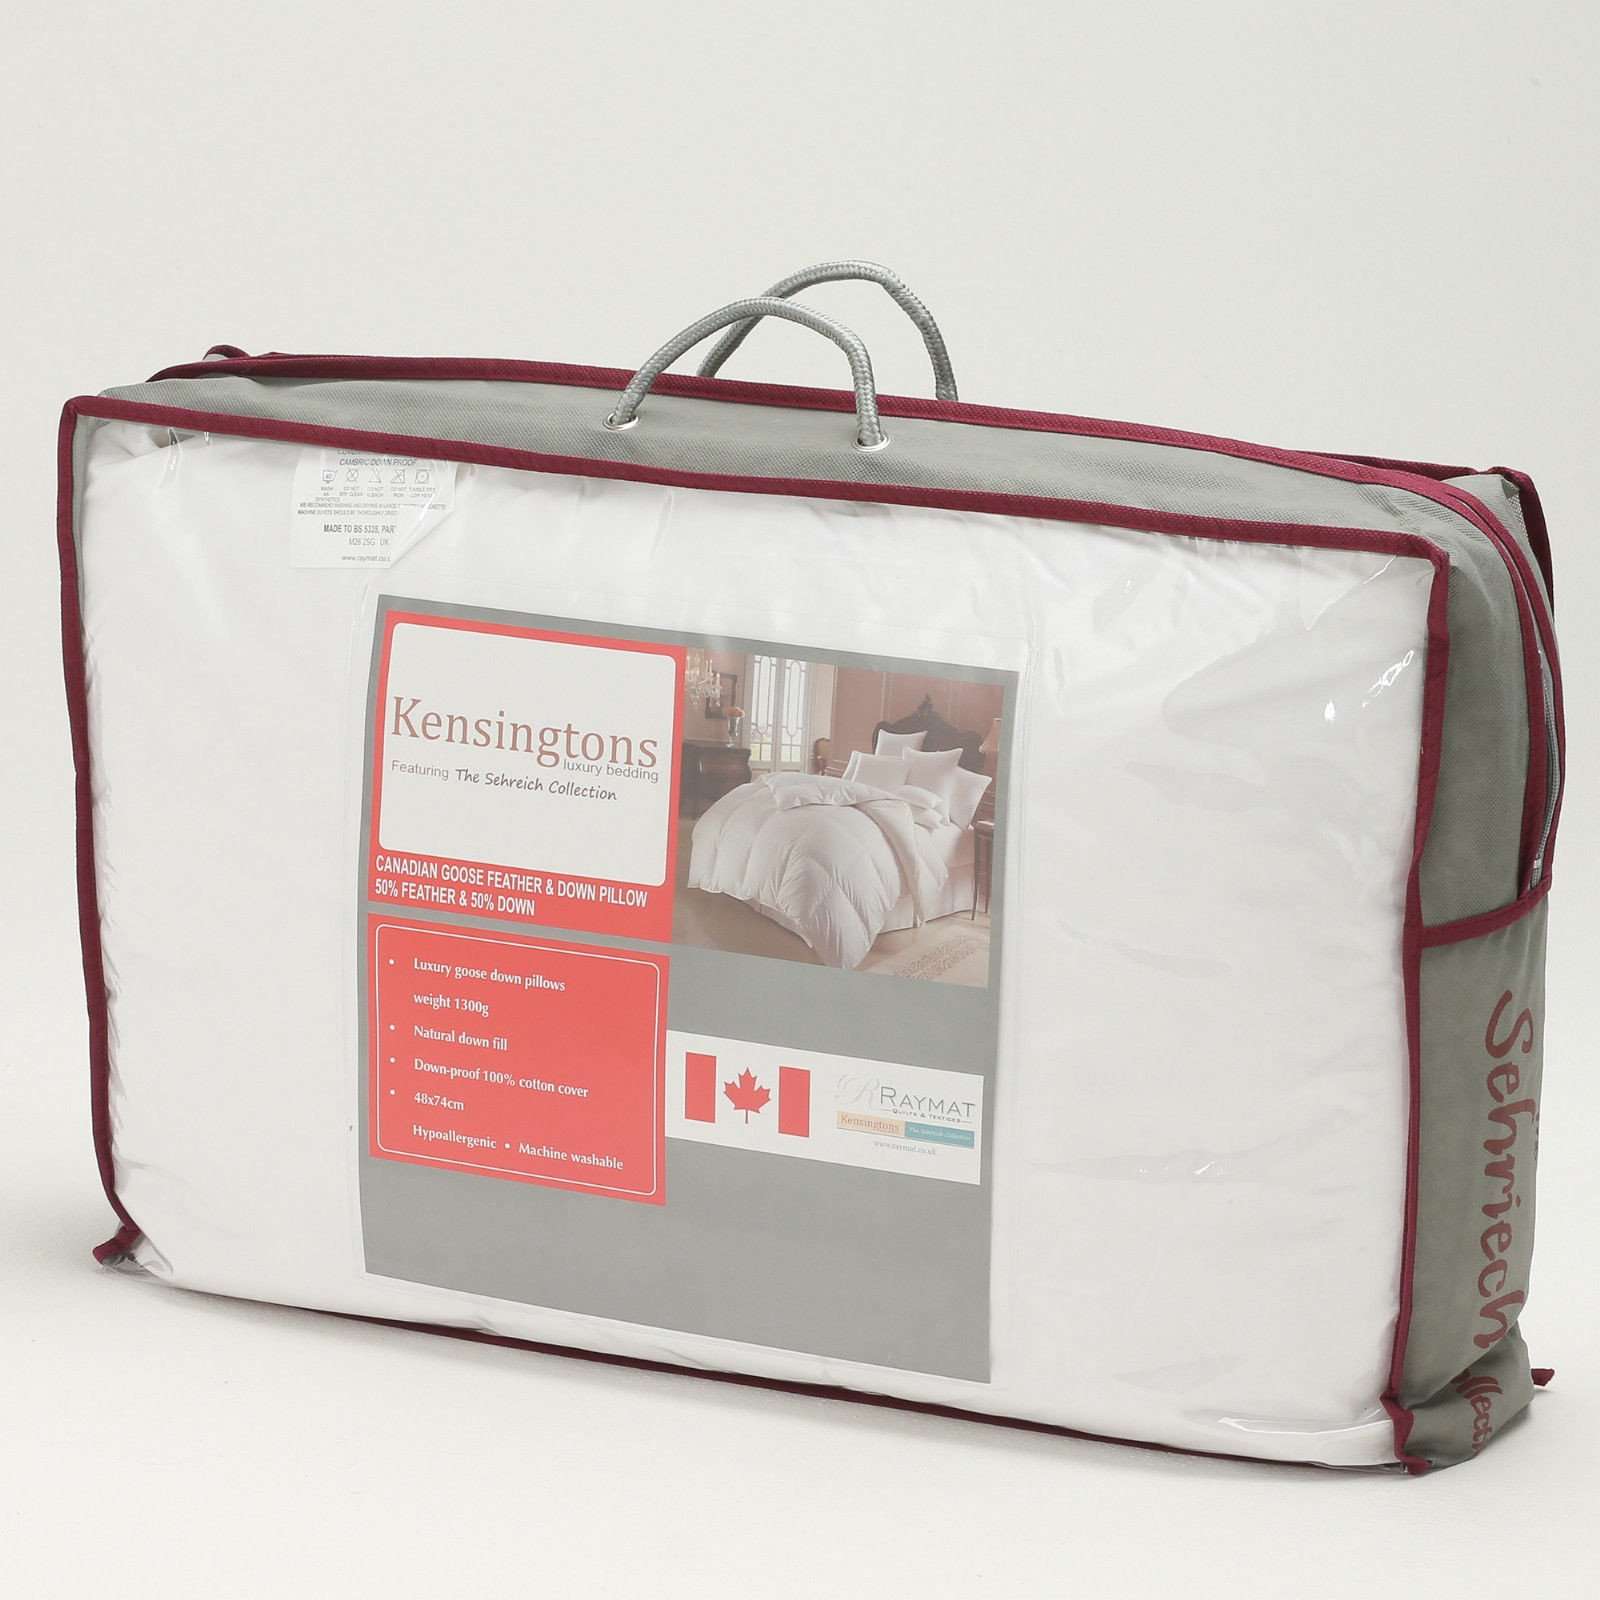 Luxurious-Canadian-Goose-Feather-&-Down-Pillows-by-Kensingtons